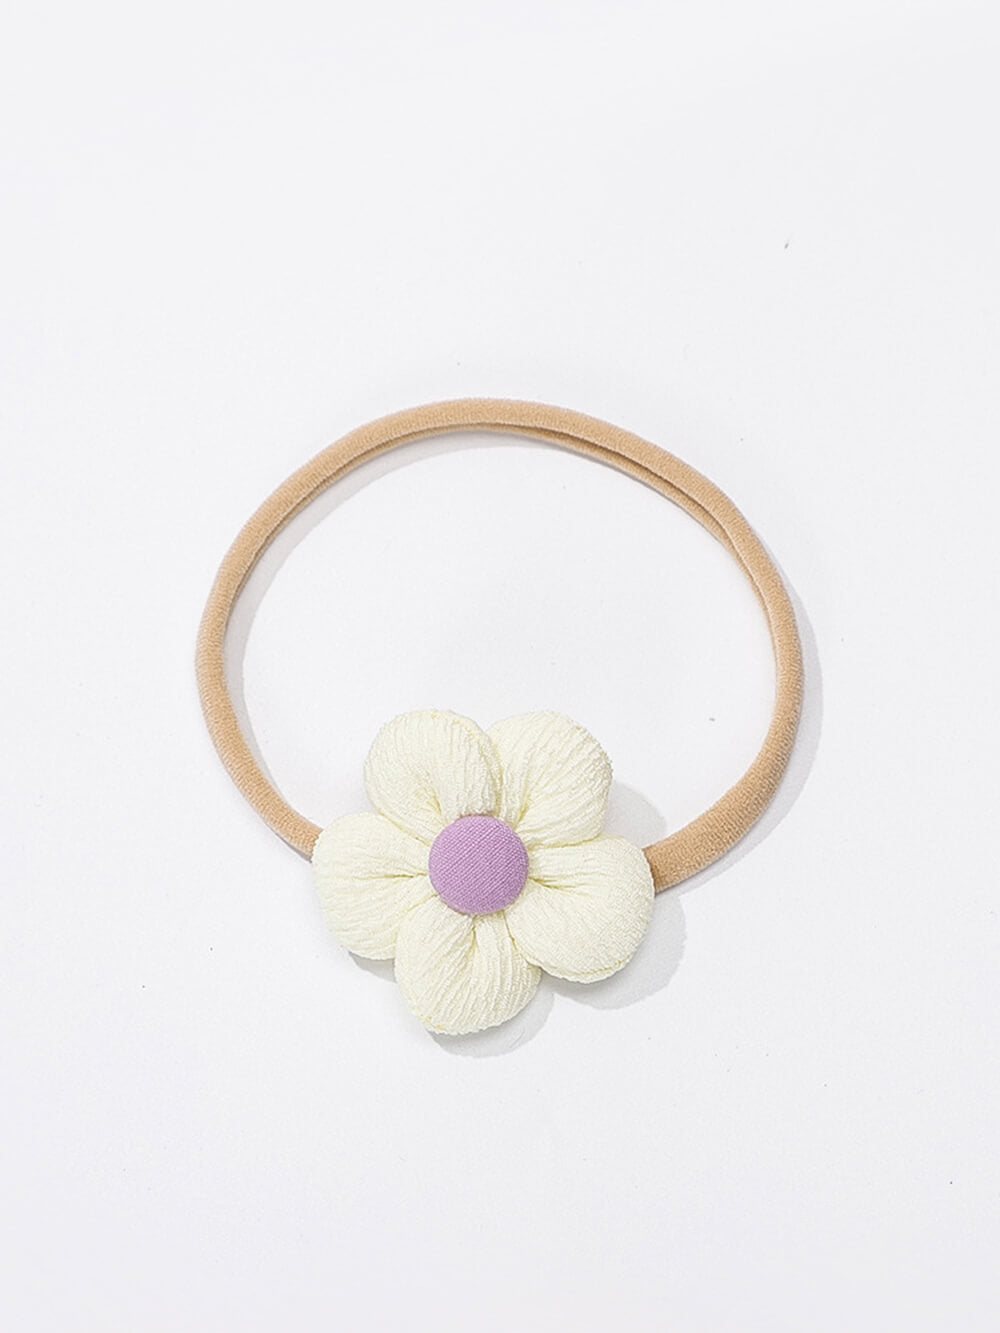 Tropical Blossom Candy Color Hair Tie